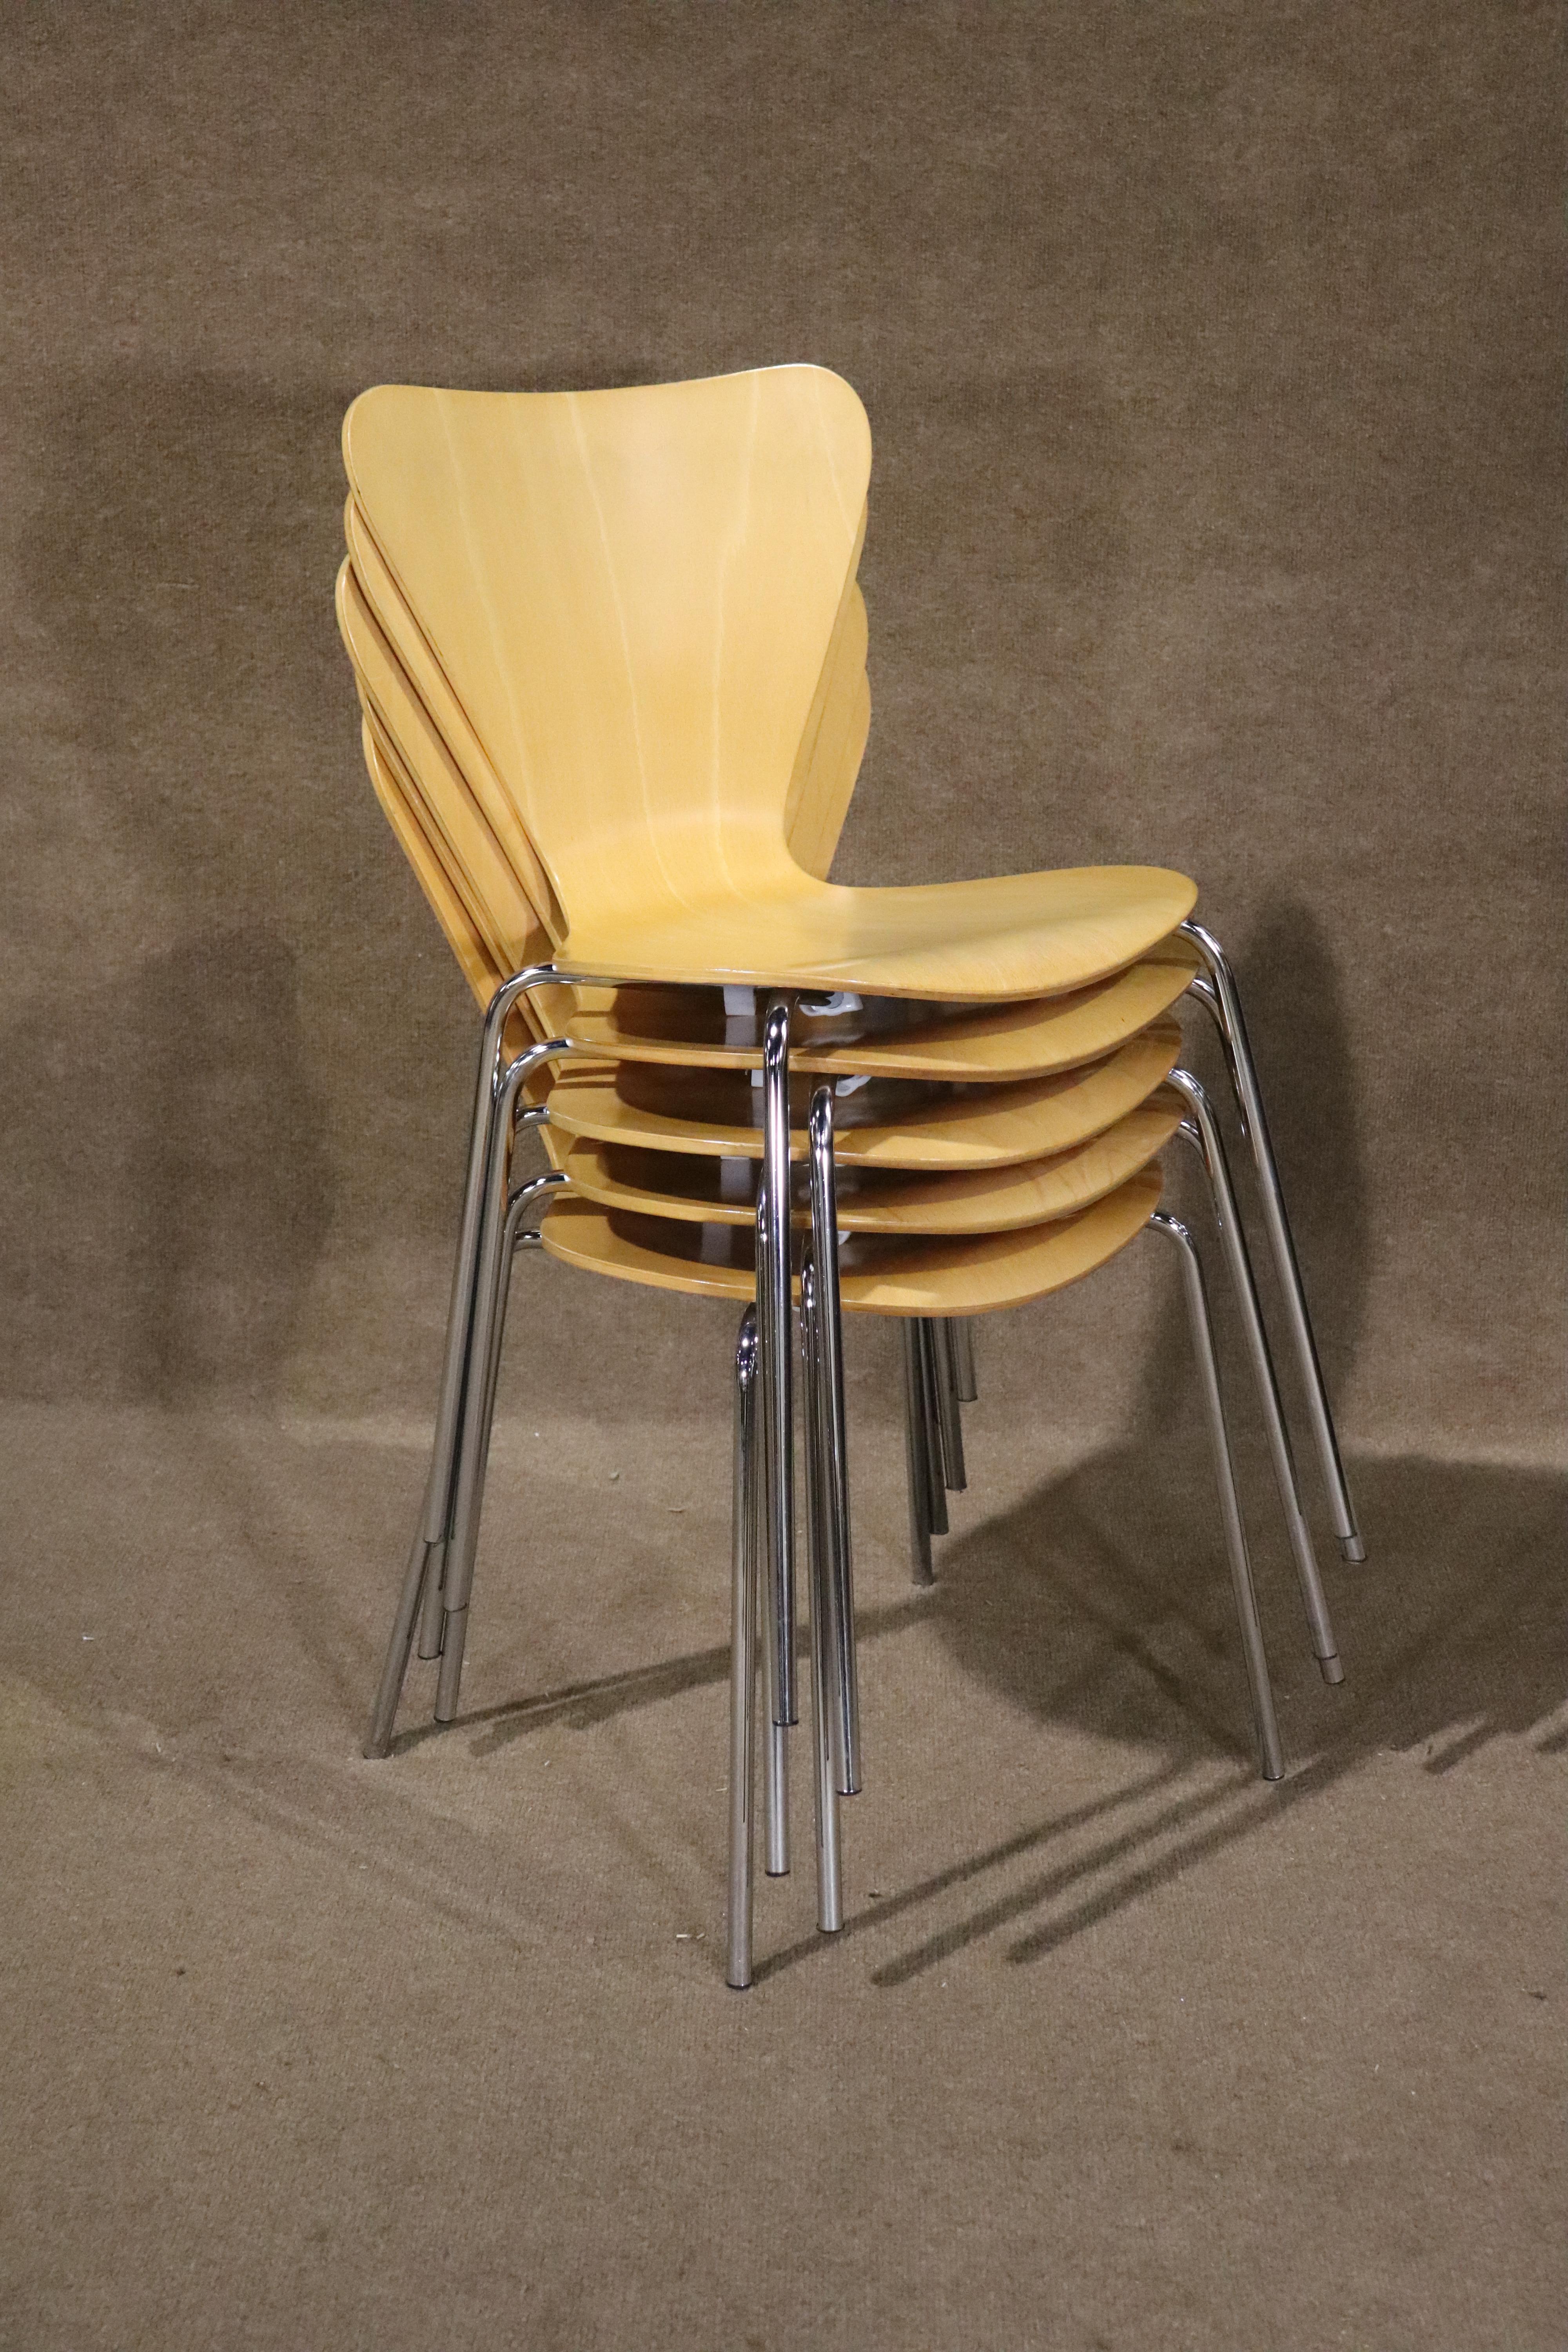 These modern chairs are styled after the famous Series 7 stacking chairs by Arne Jacobsen. Simple mid-century modern design with maple bentwood seats on polished chrome legs.
Please confirm location NY or NJ